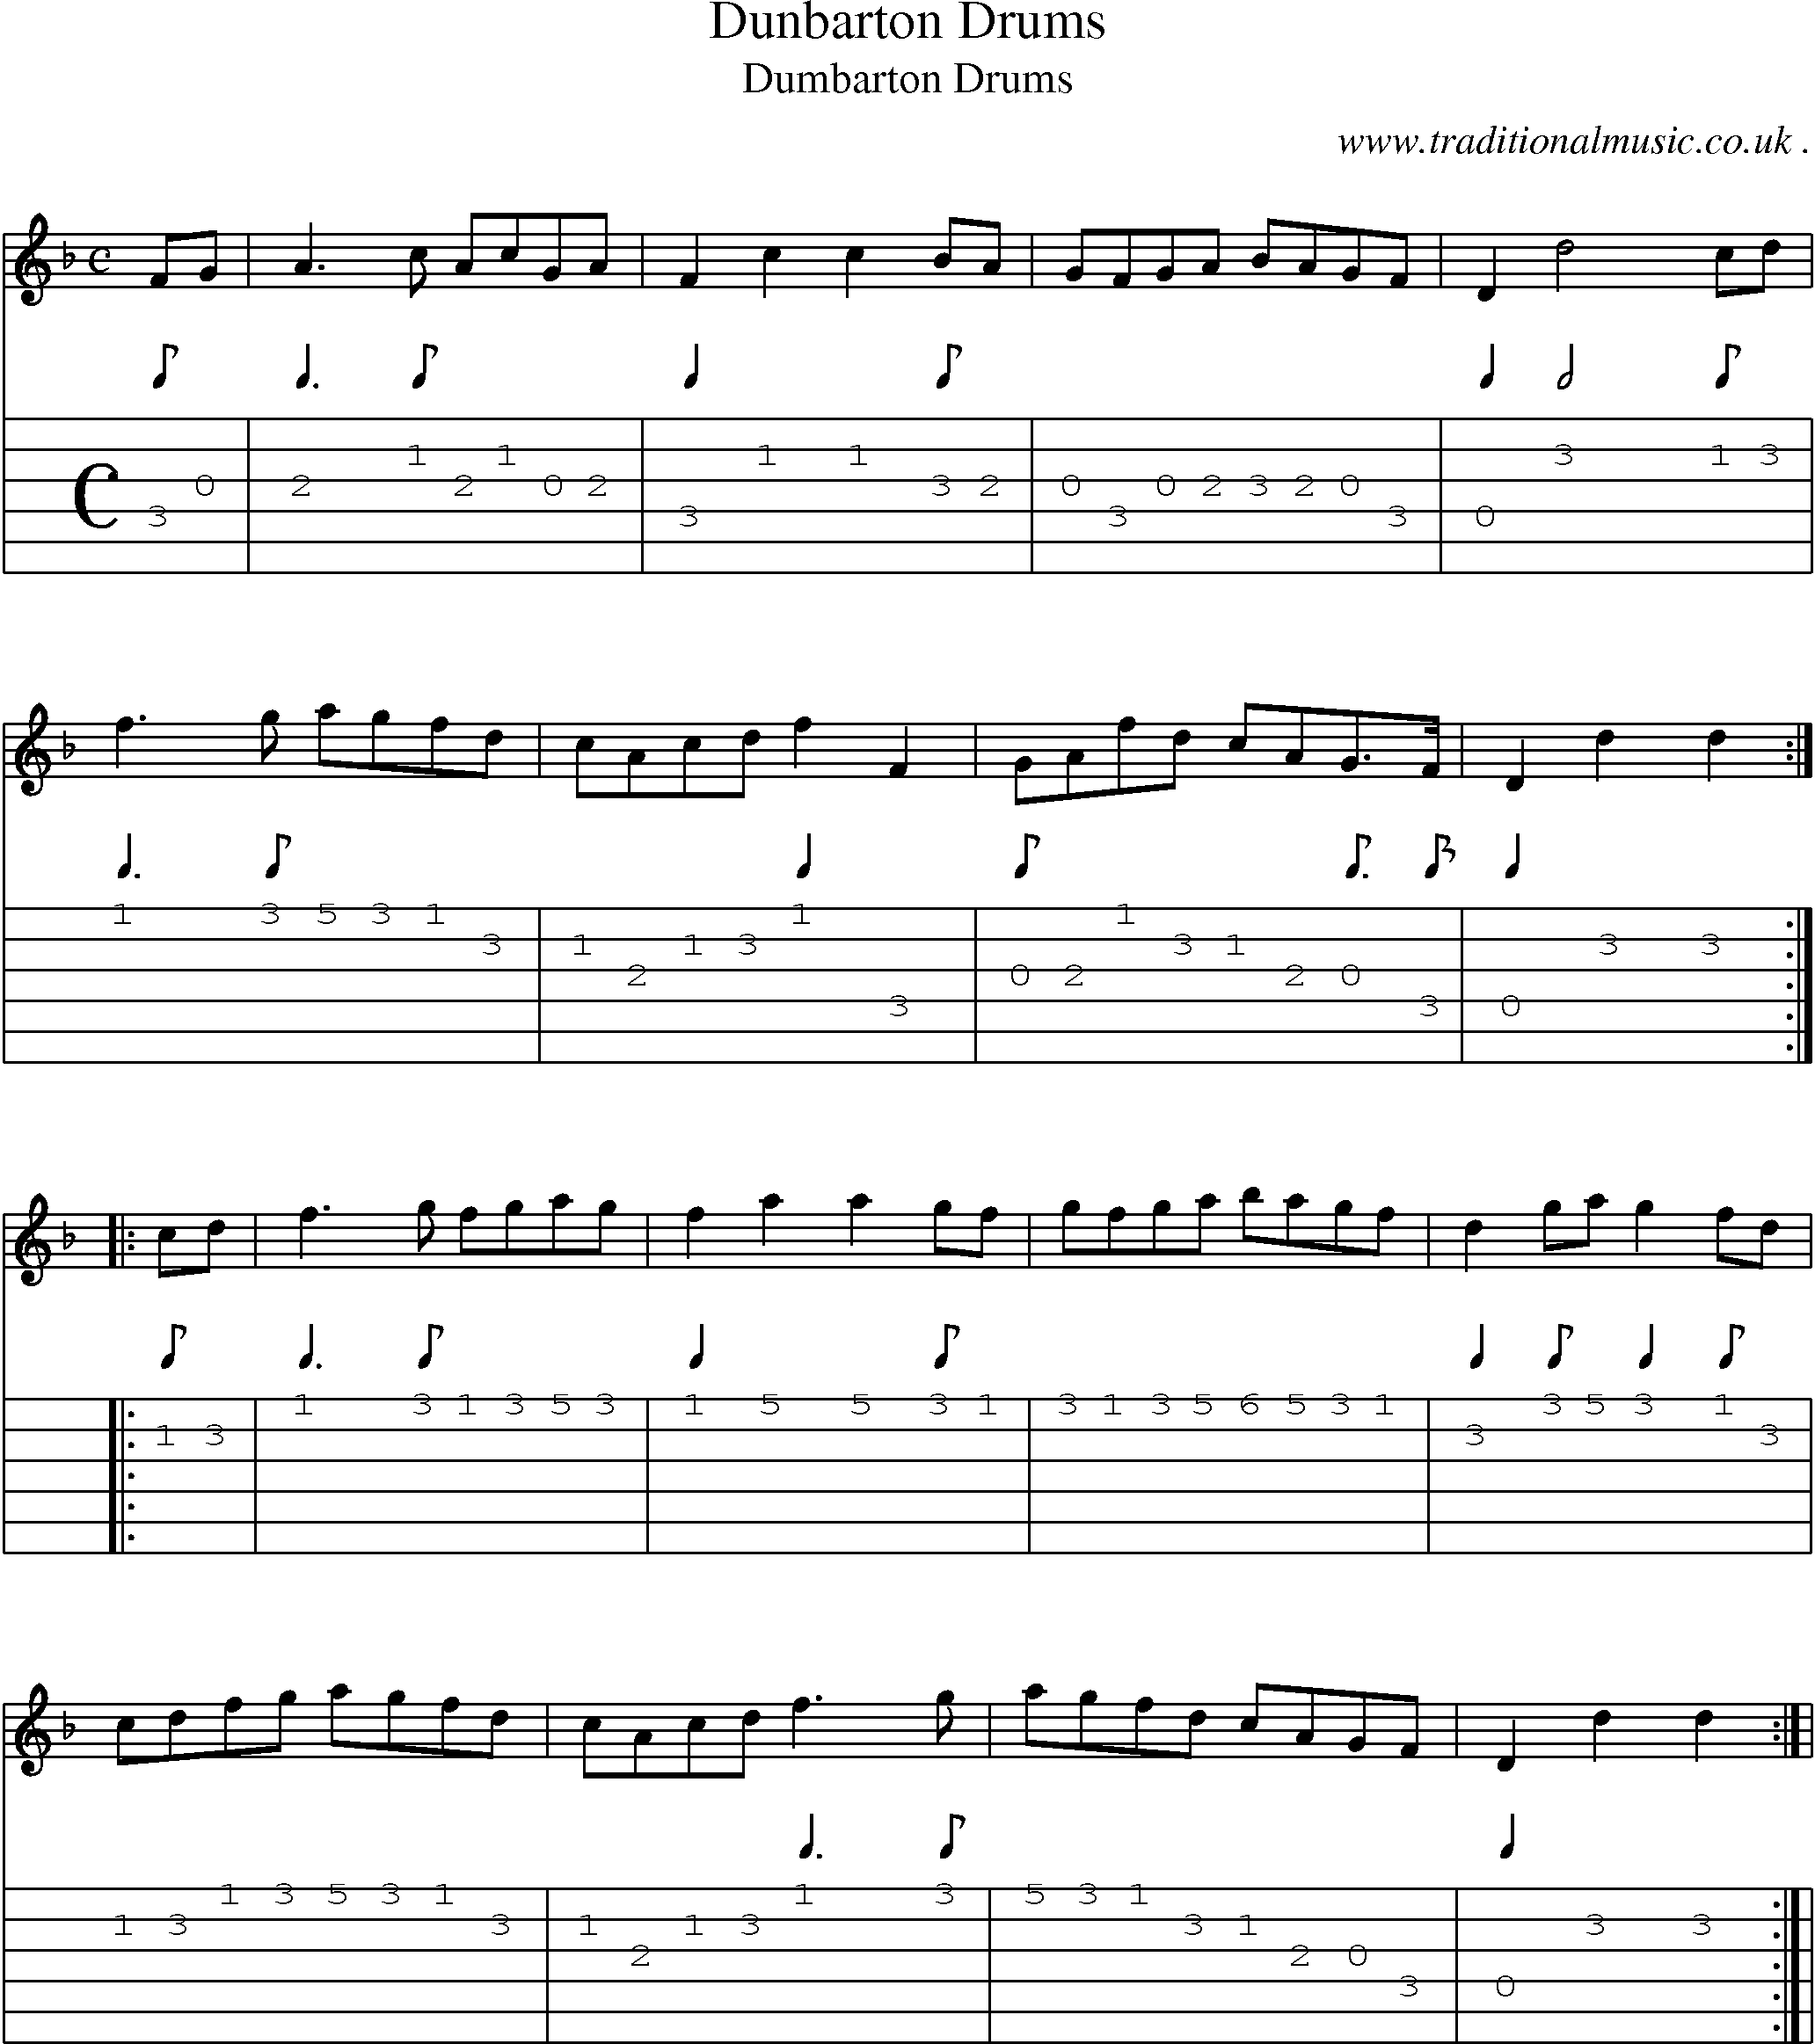 Sheet-Music and Guitar Tabs for Dunbarton Drums